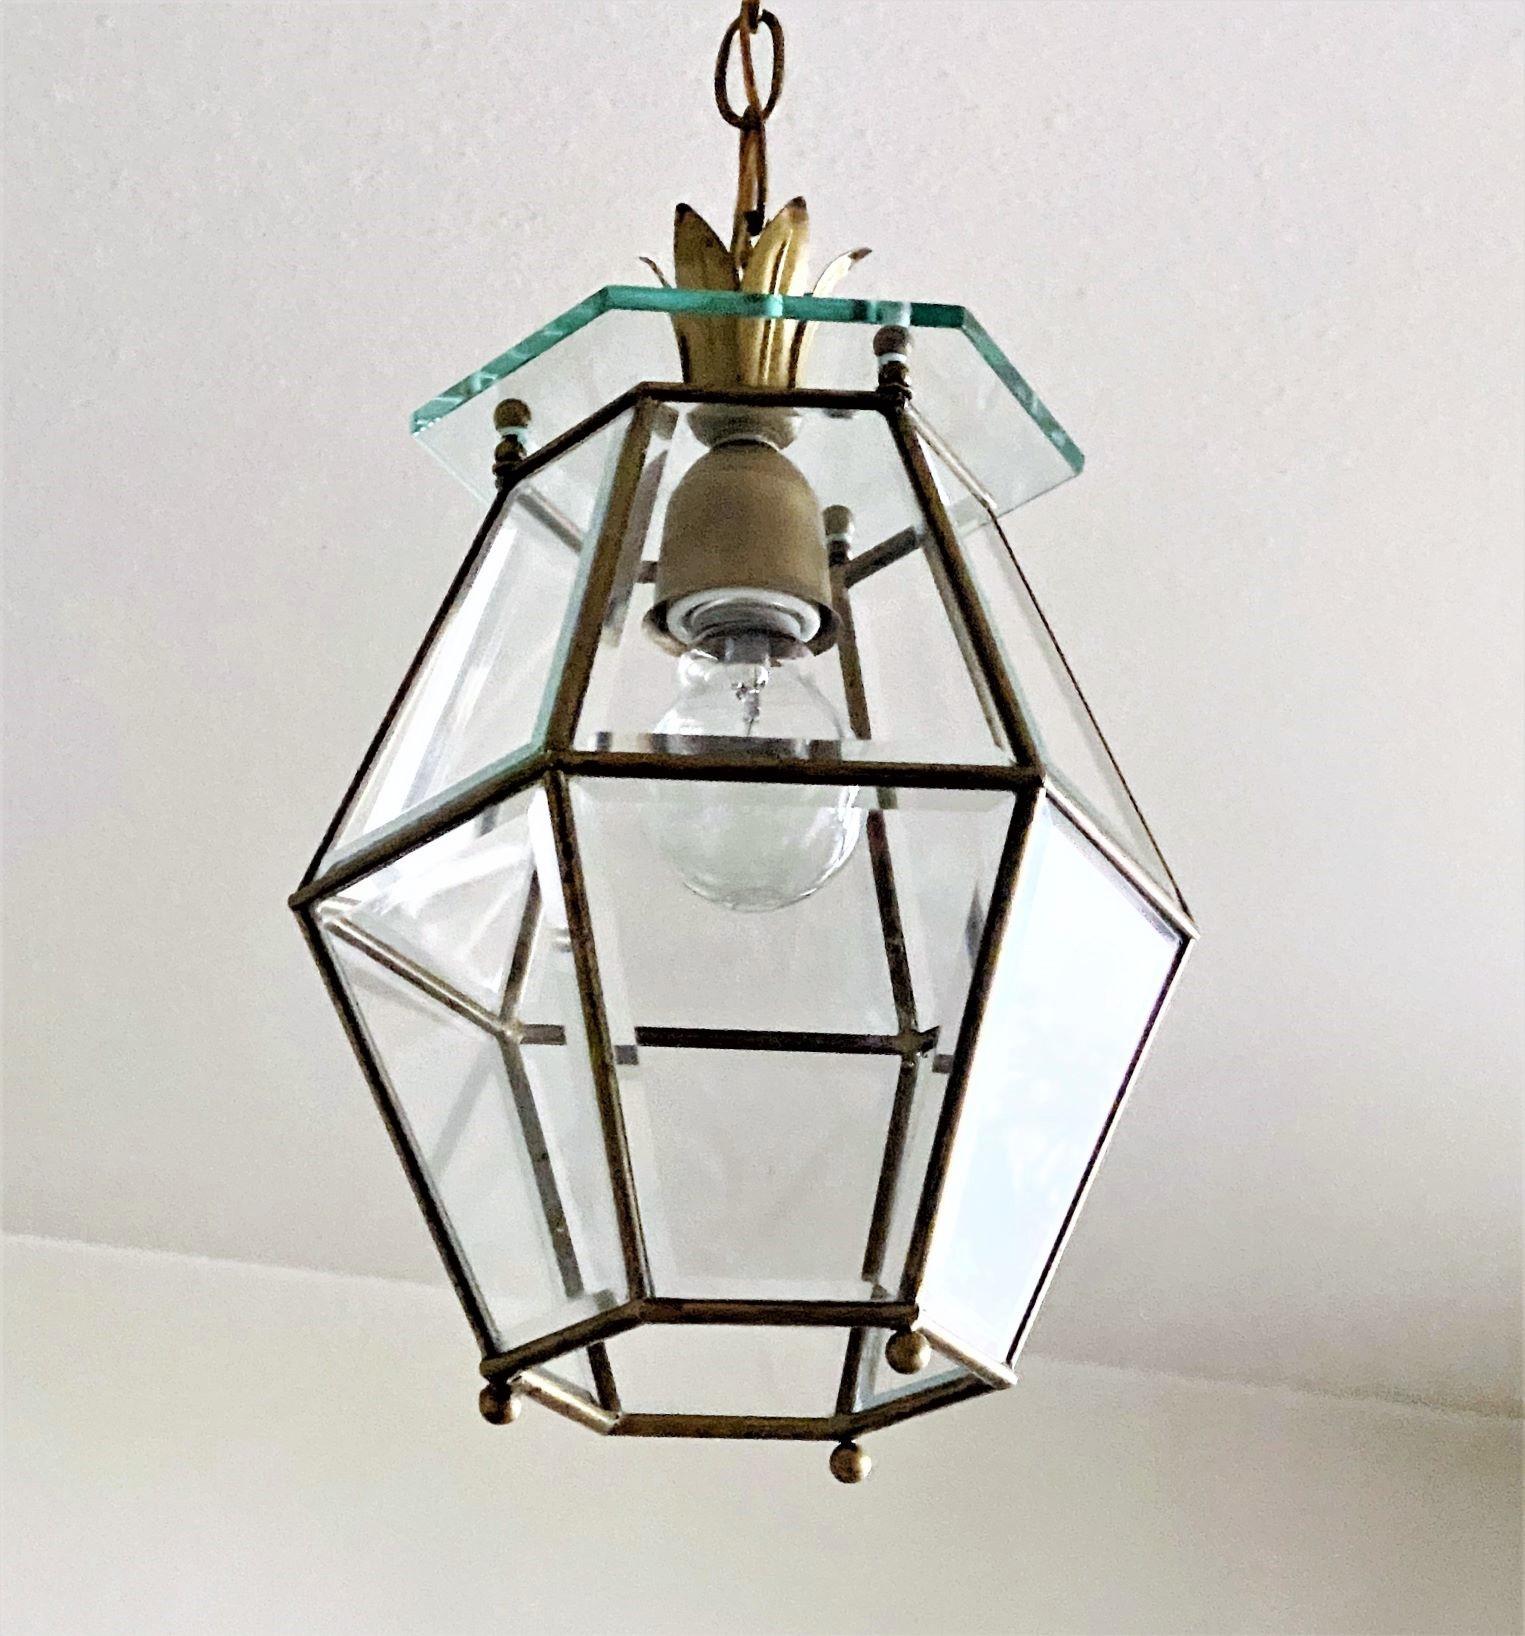 A lovely Fontana Arte style faceted glass and brass lantern or pendant, Italy, 1940s. It takes one E27 large sized light bulb. In fine vintage condition, no chips or cracks, aged patina to brass, rewired.
Measures:
Overall height: 27